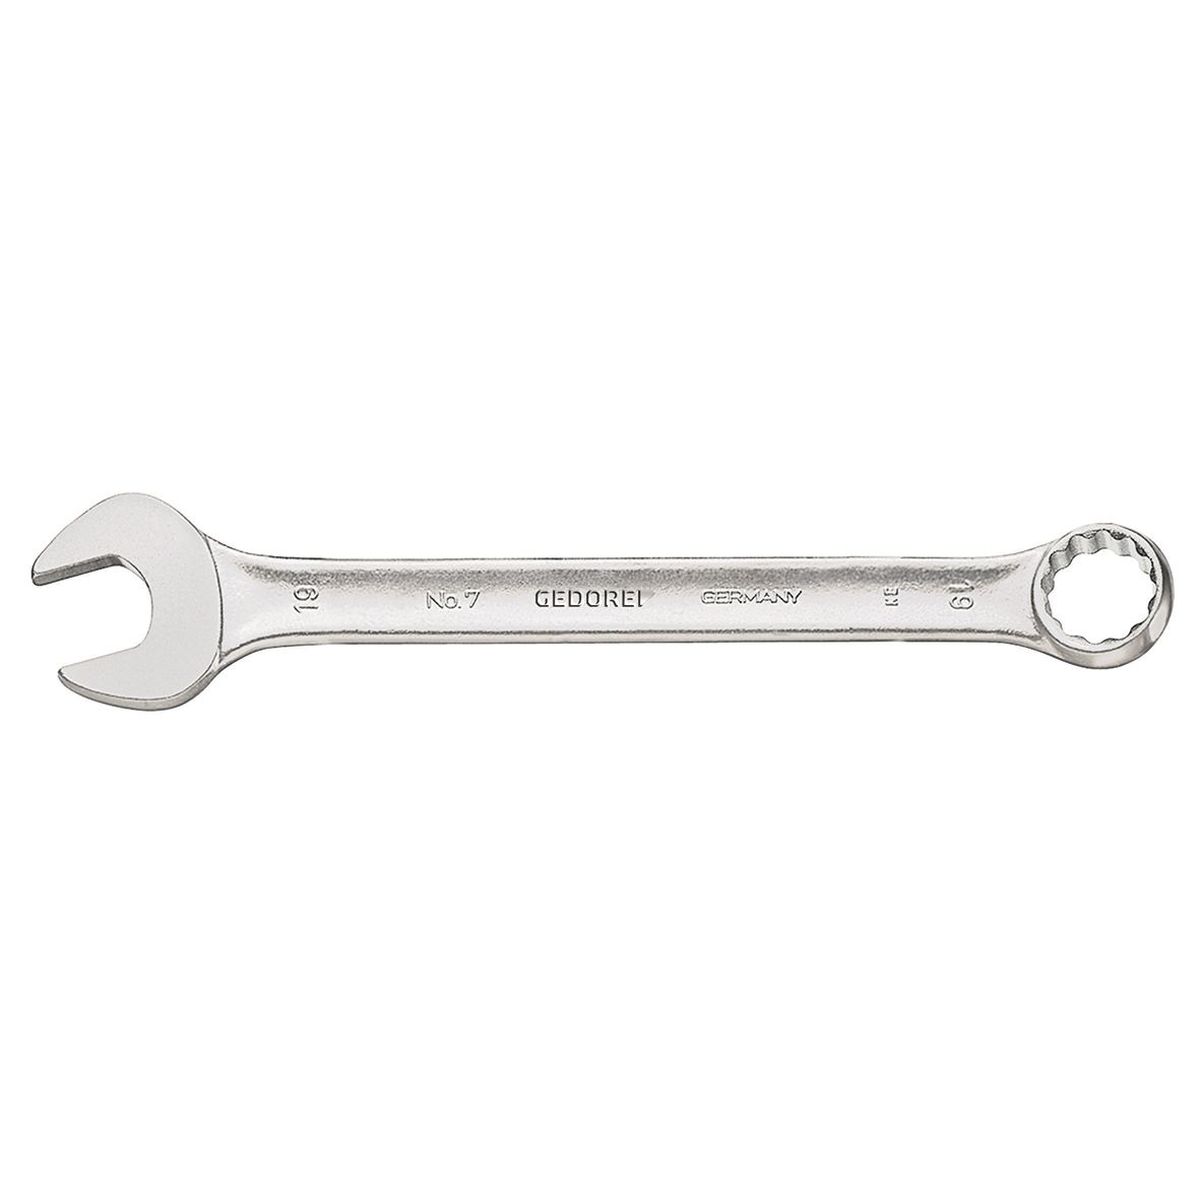 Combination spanner 26mm No.7 26 Gedore